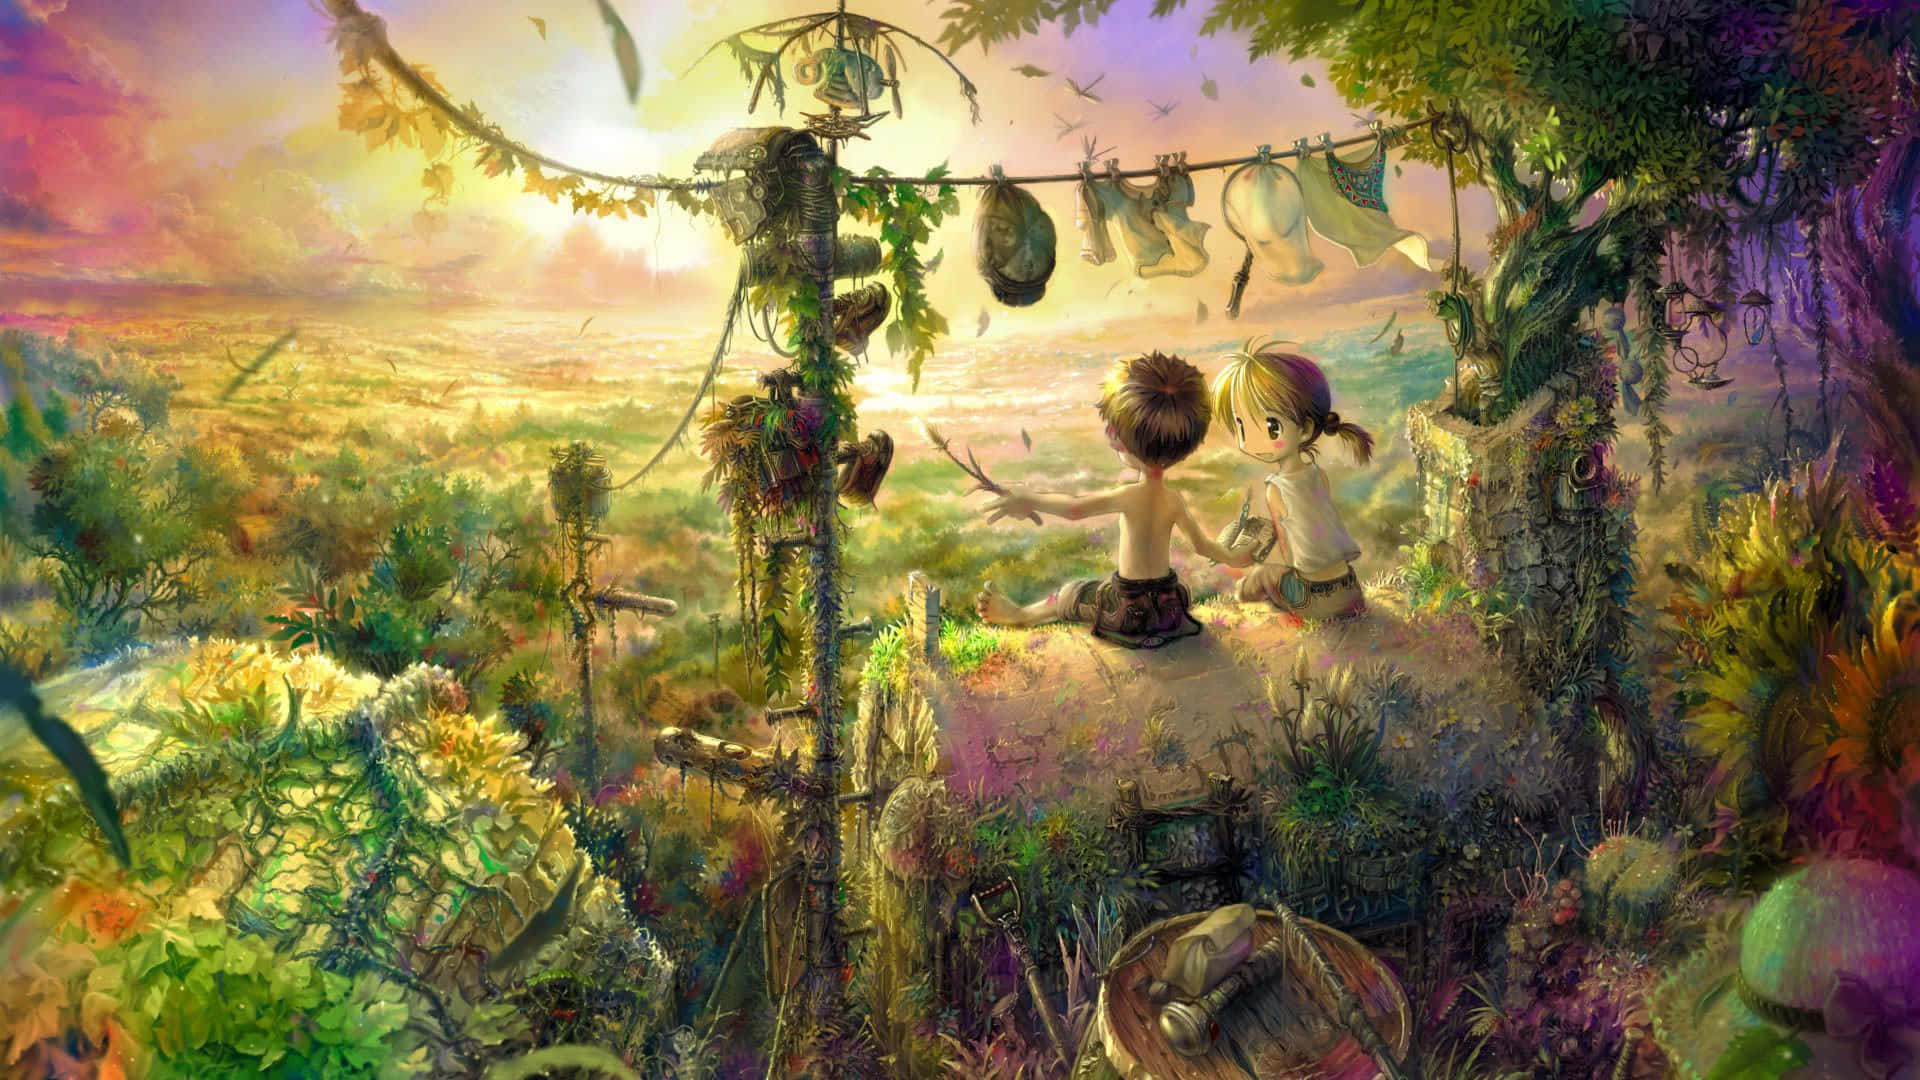 Escape into a world of imagination and adventure with this Fantasy Anime wallpaper" Wallpaper